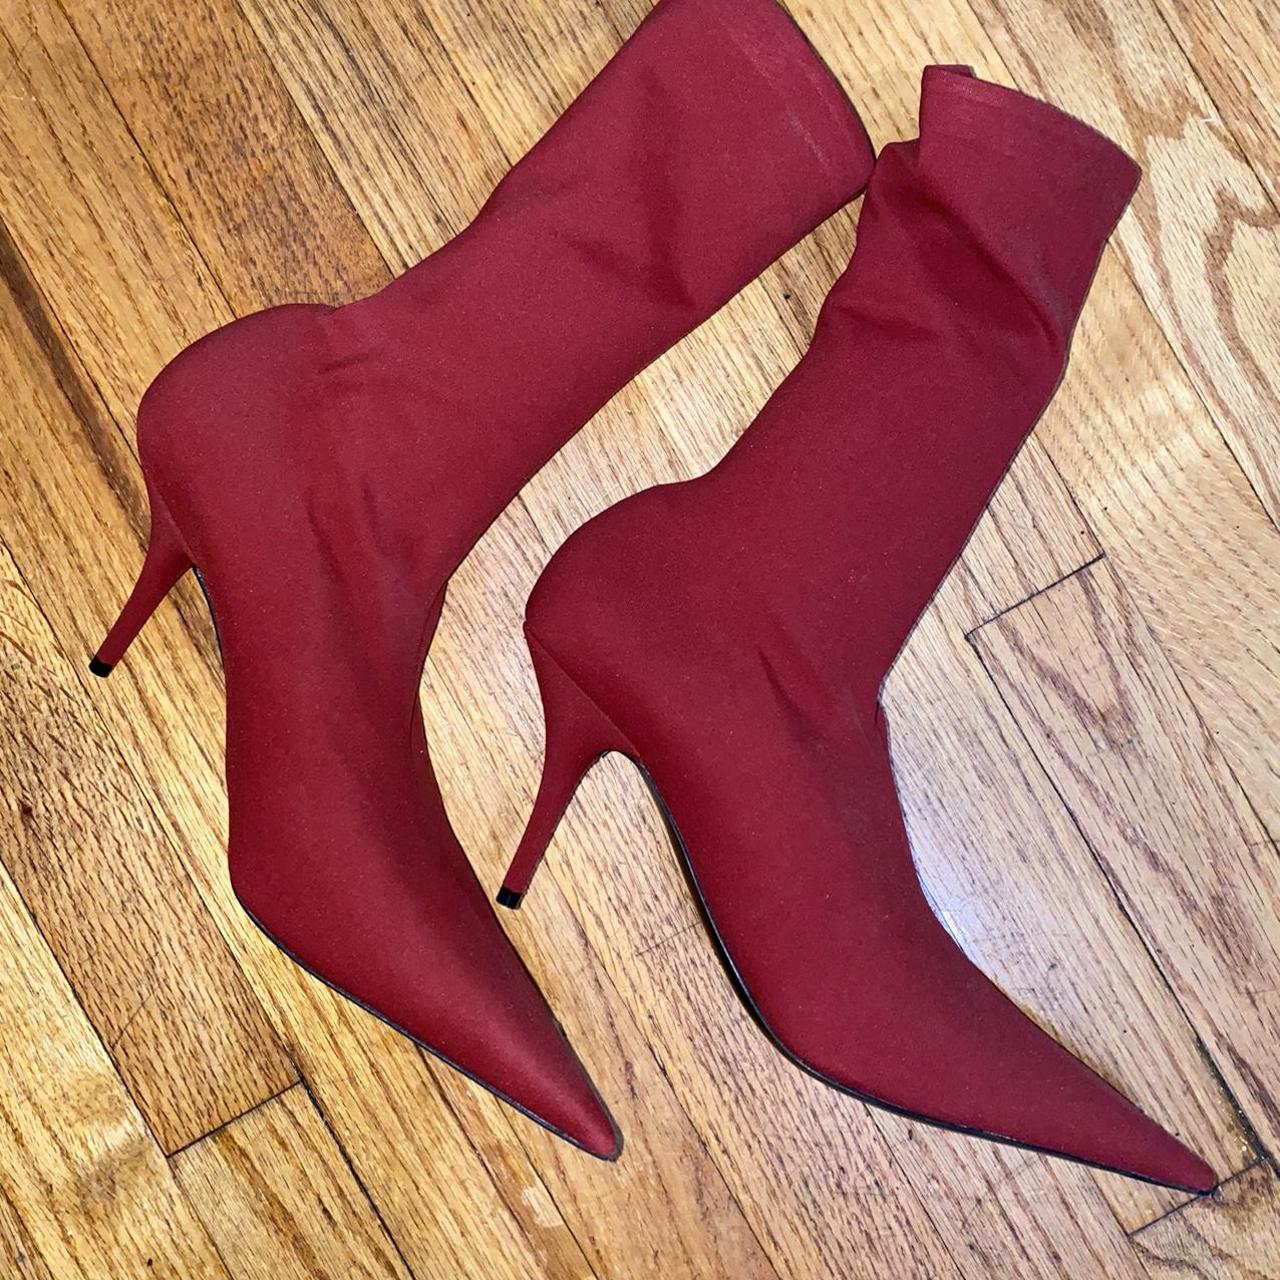 Balenciaga Knife Stretchjersey Ankle Boots In Red  ModeSens